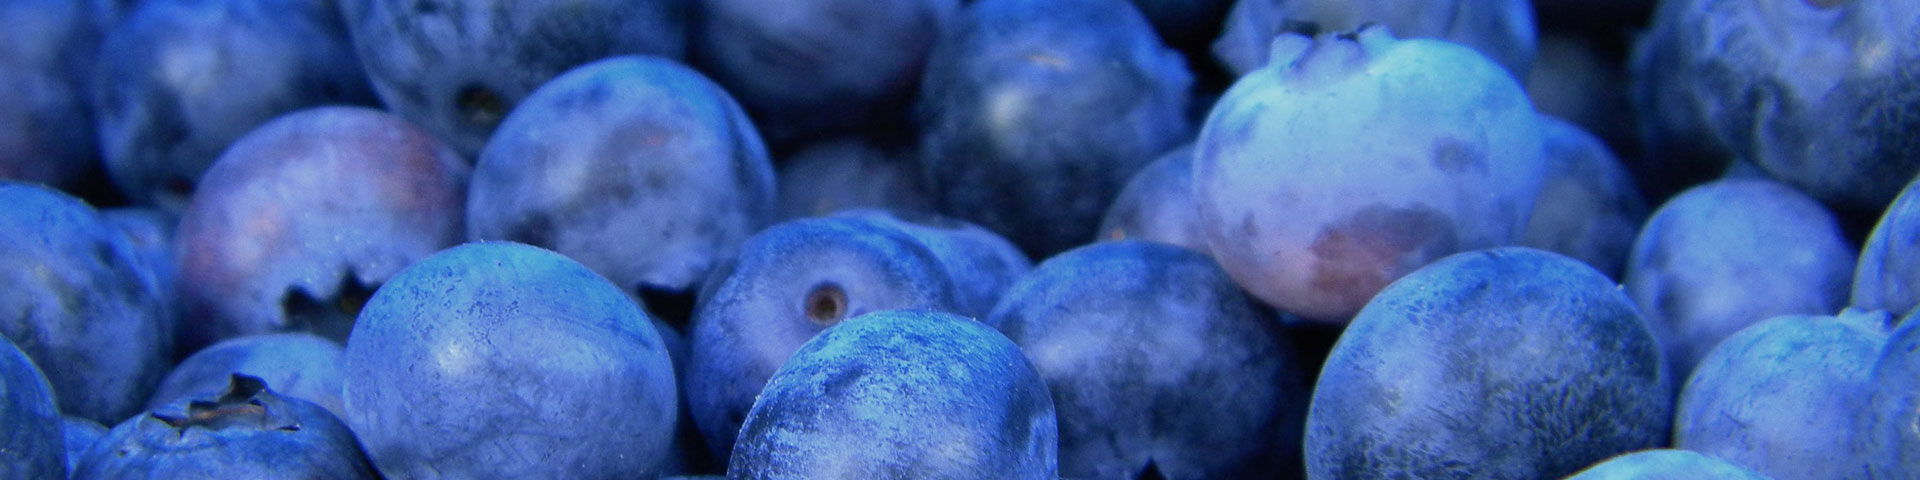 A picture of blueberries close up.